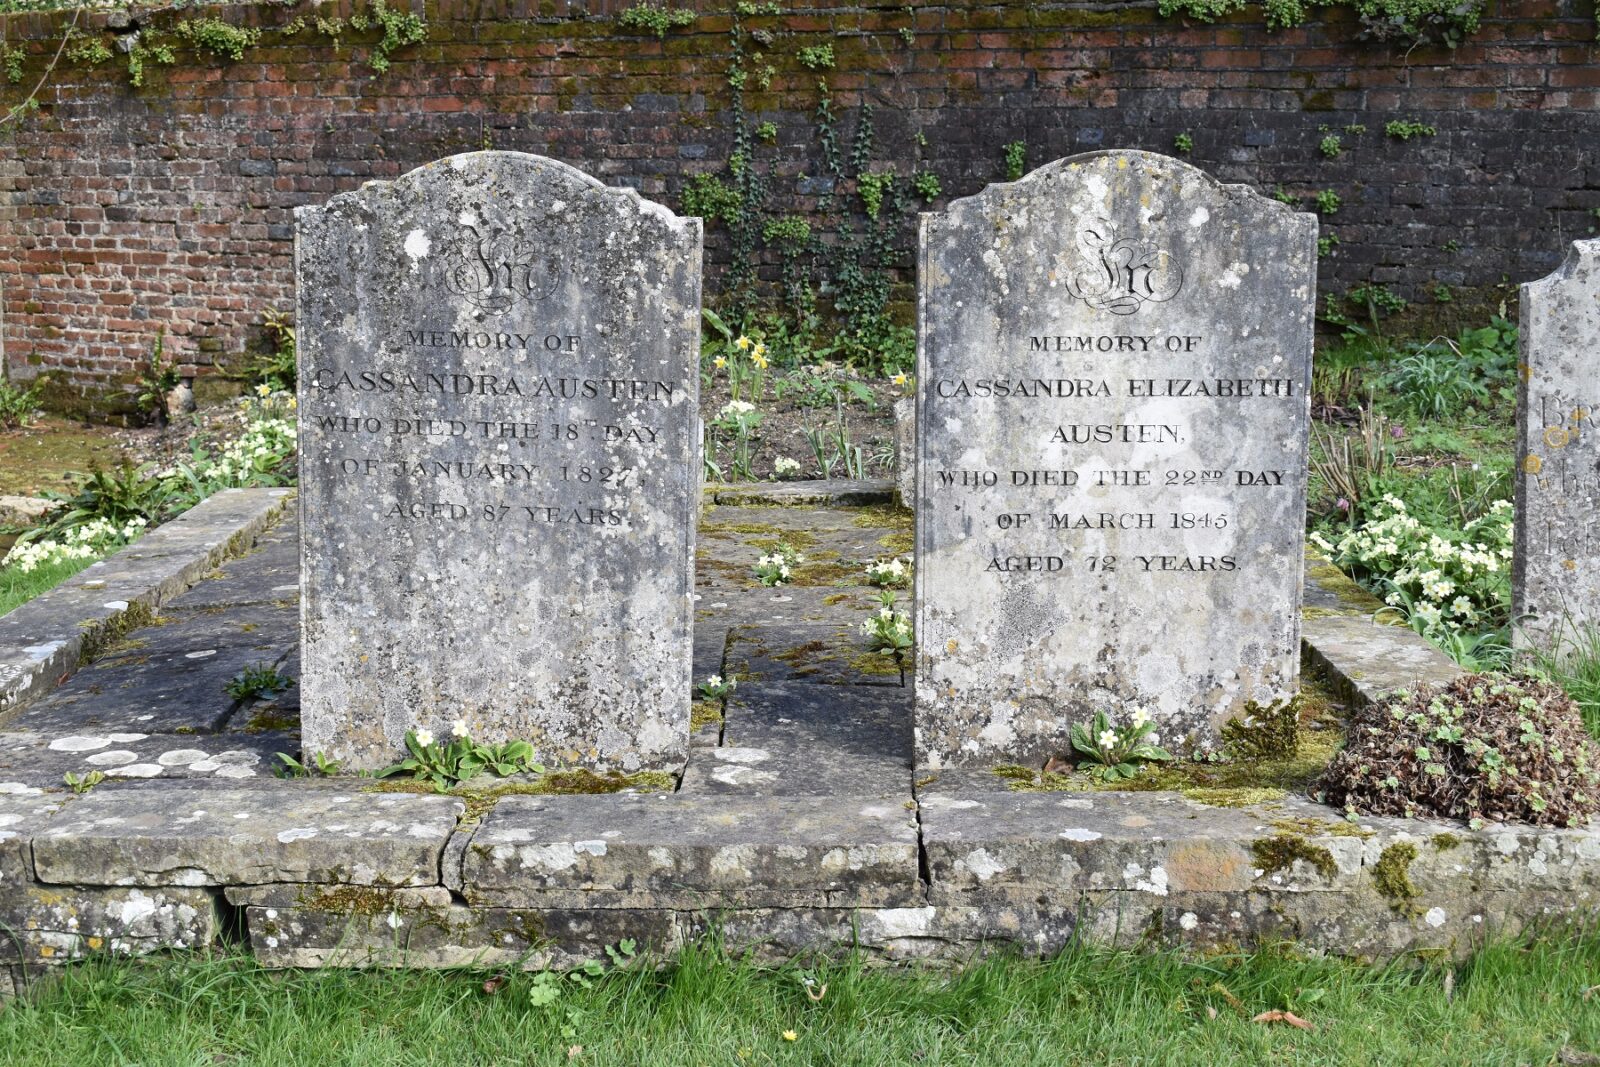 The graves of Mrs Austen and Cassandra, in Chawton churchyard